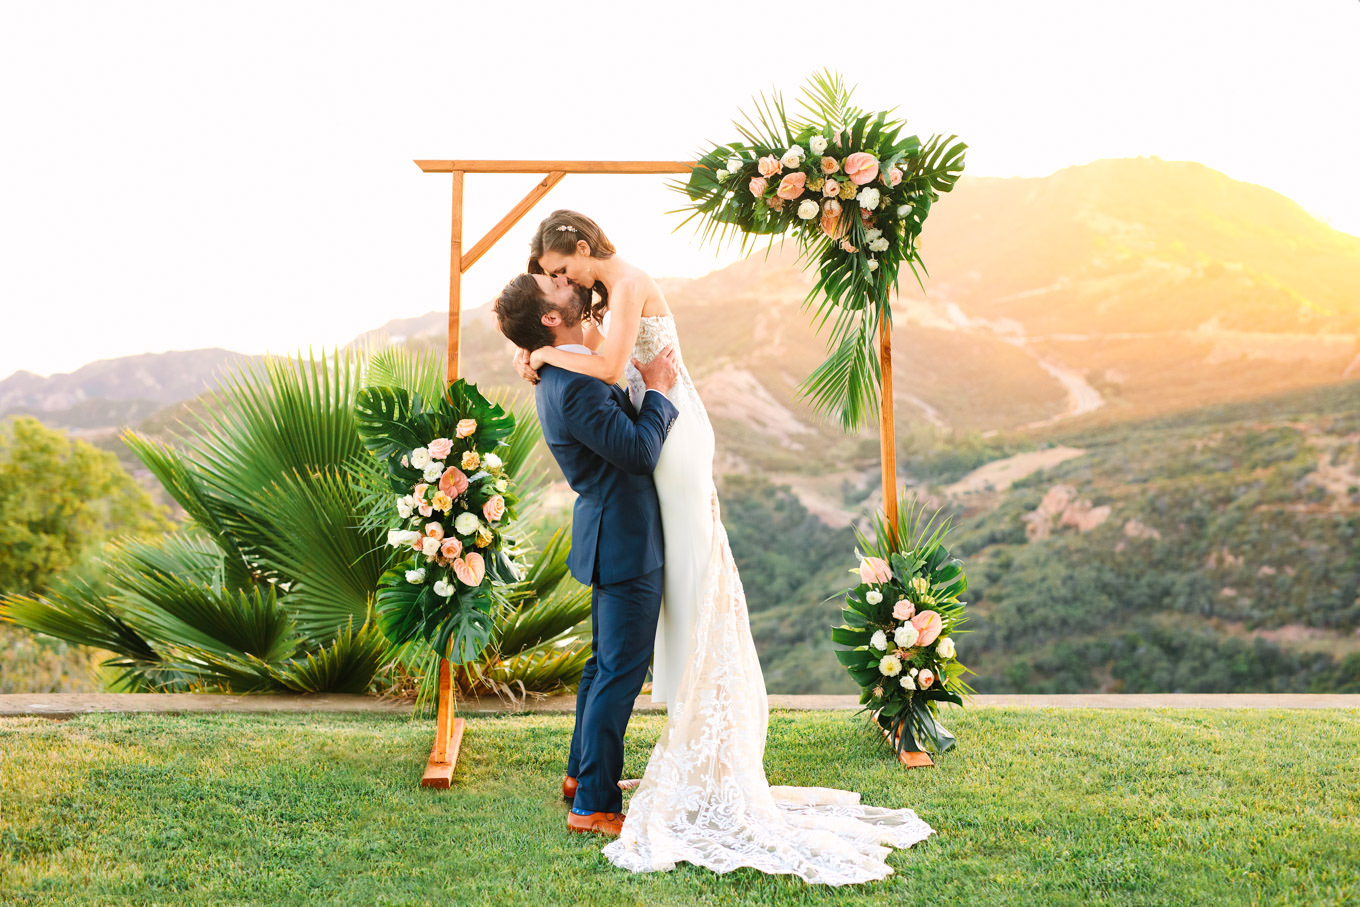 Bride and groom kissing at Topanga micro wedding | Engagement, elopement, and wedding photography roundup of Mary Costa’s favorite images from 2020 | Colorful and elevated photography for fun-loving couples in Southern California | #2020wedding #elopement #weddingphoto #weddingphotography #microwedding   Source: Mary Costa Photography | Los Angeles